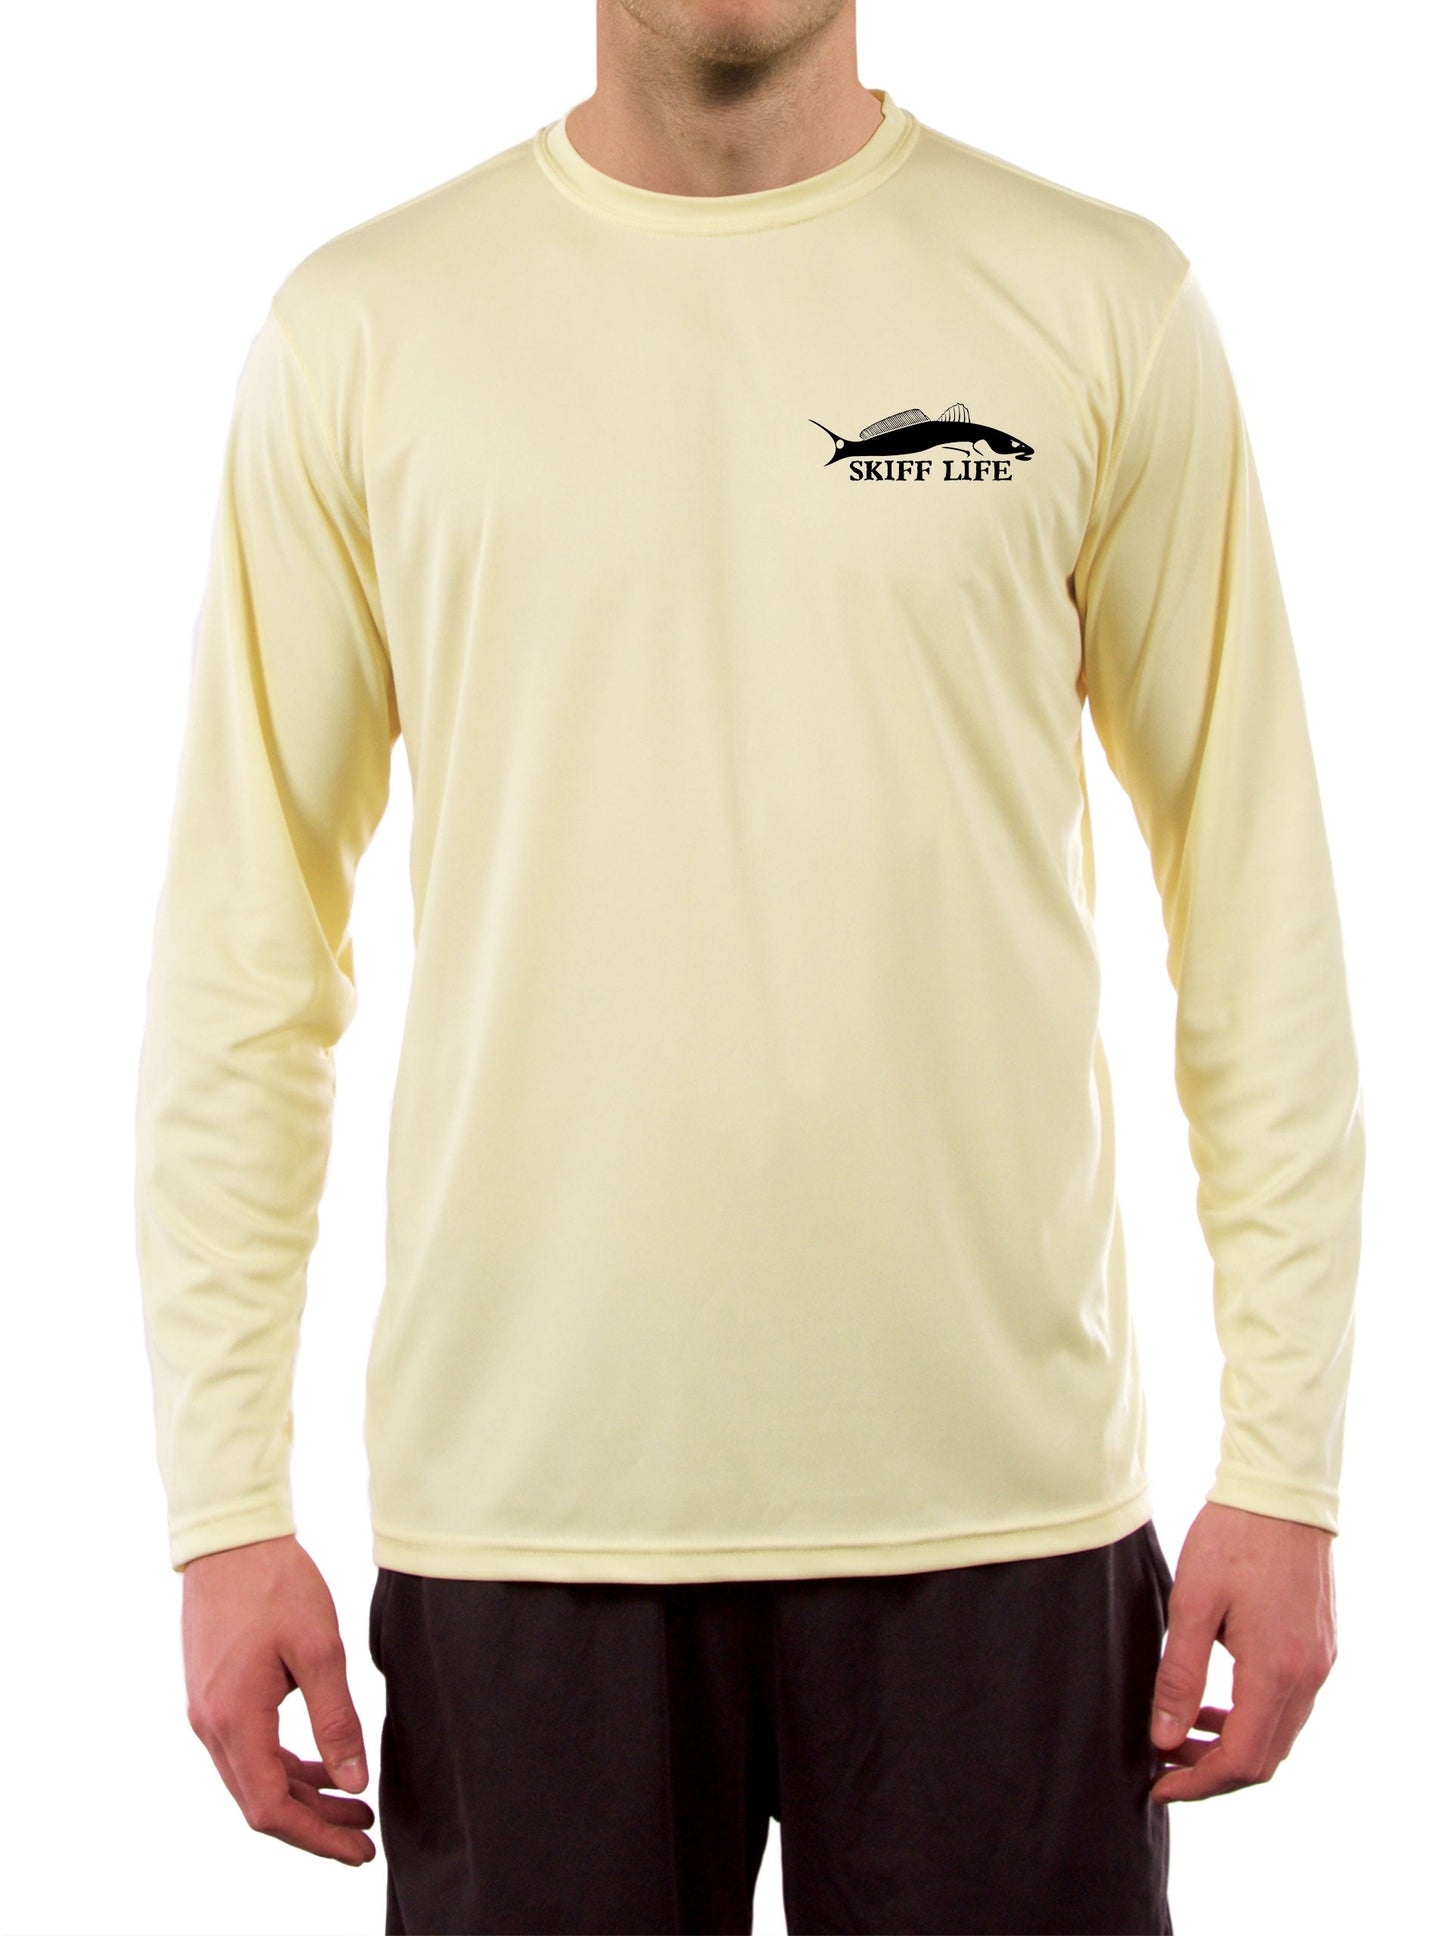 Big and Tall Mens Clothing - UV Protected Fishing T Shirt +50 Sun Protection with Moisture Wicking Technology - Up to 4XL 4XL / Yellow